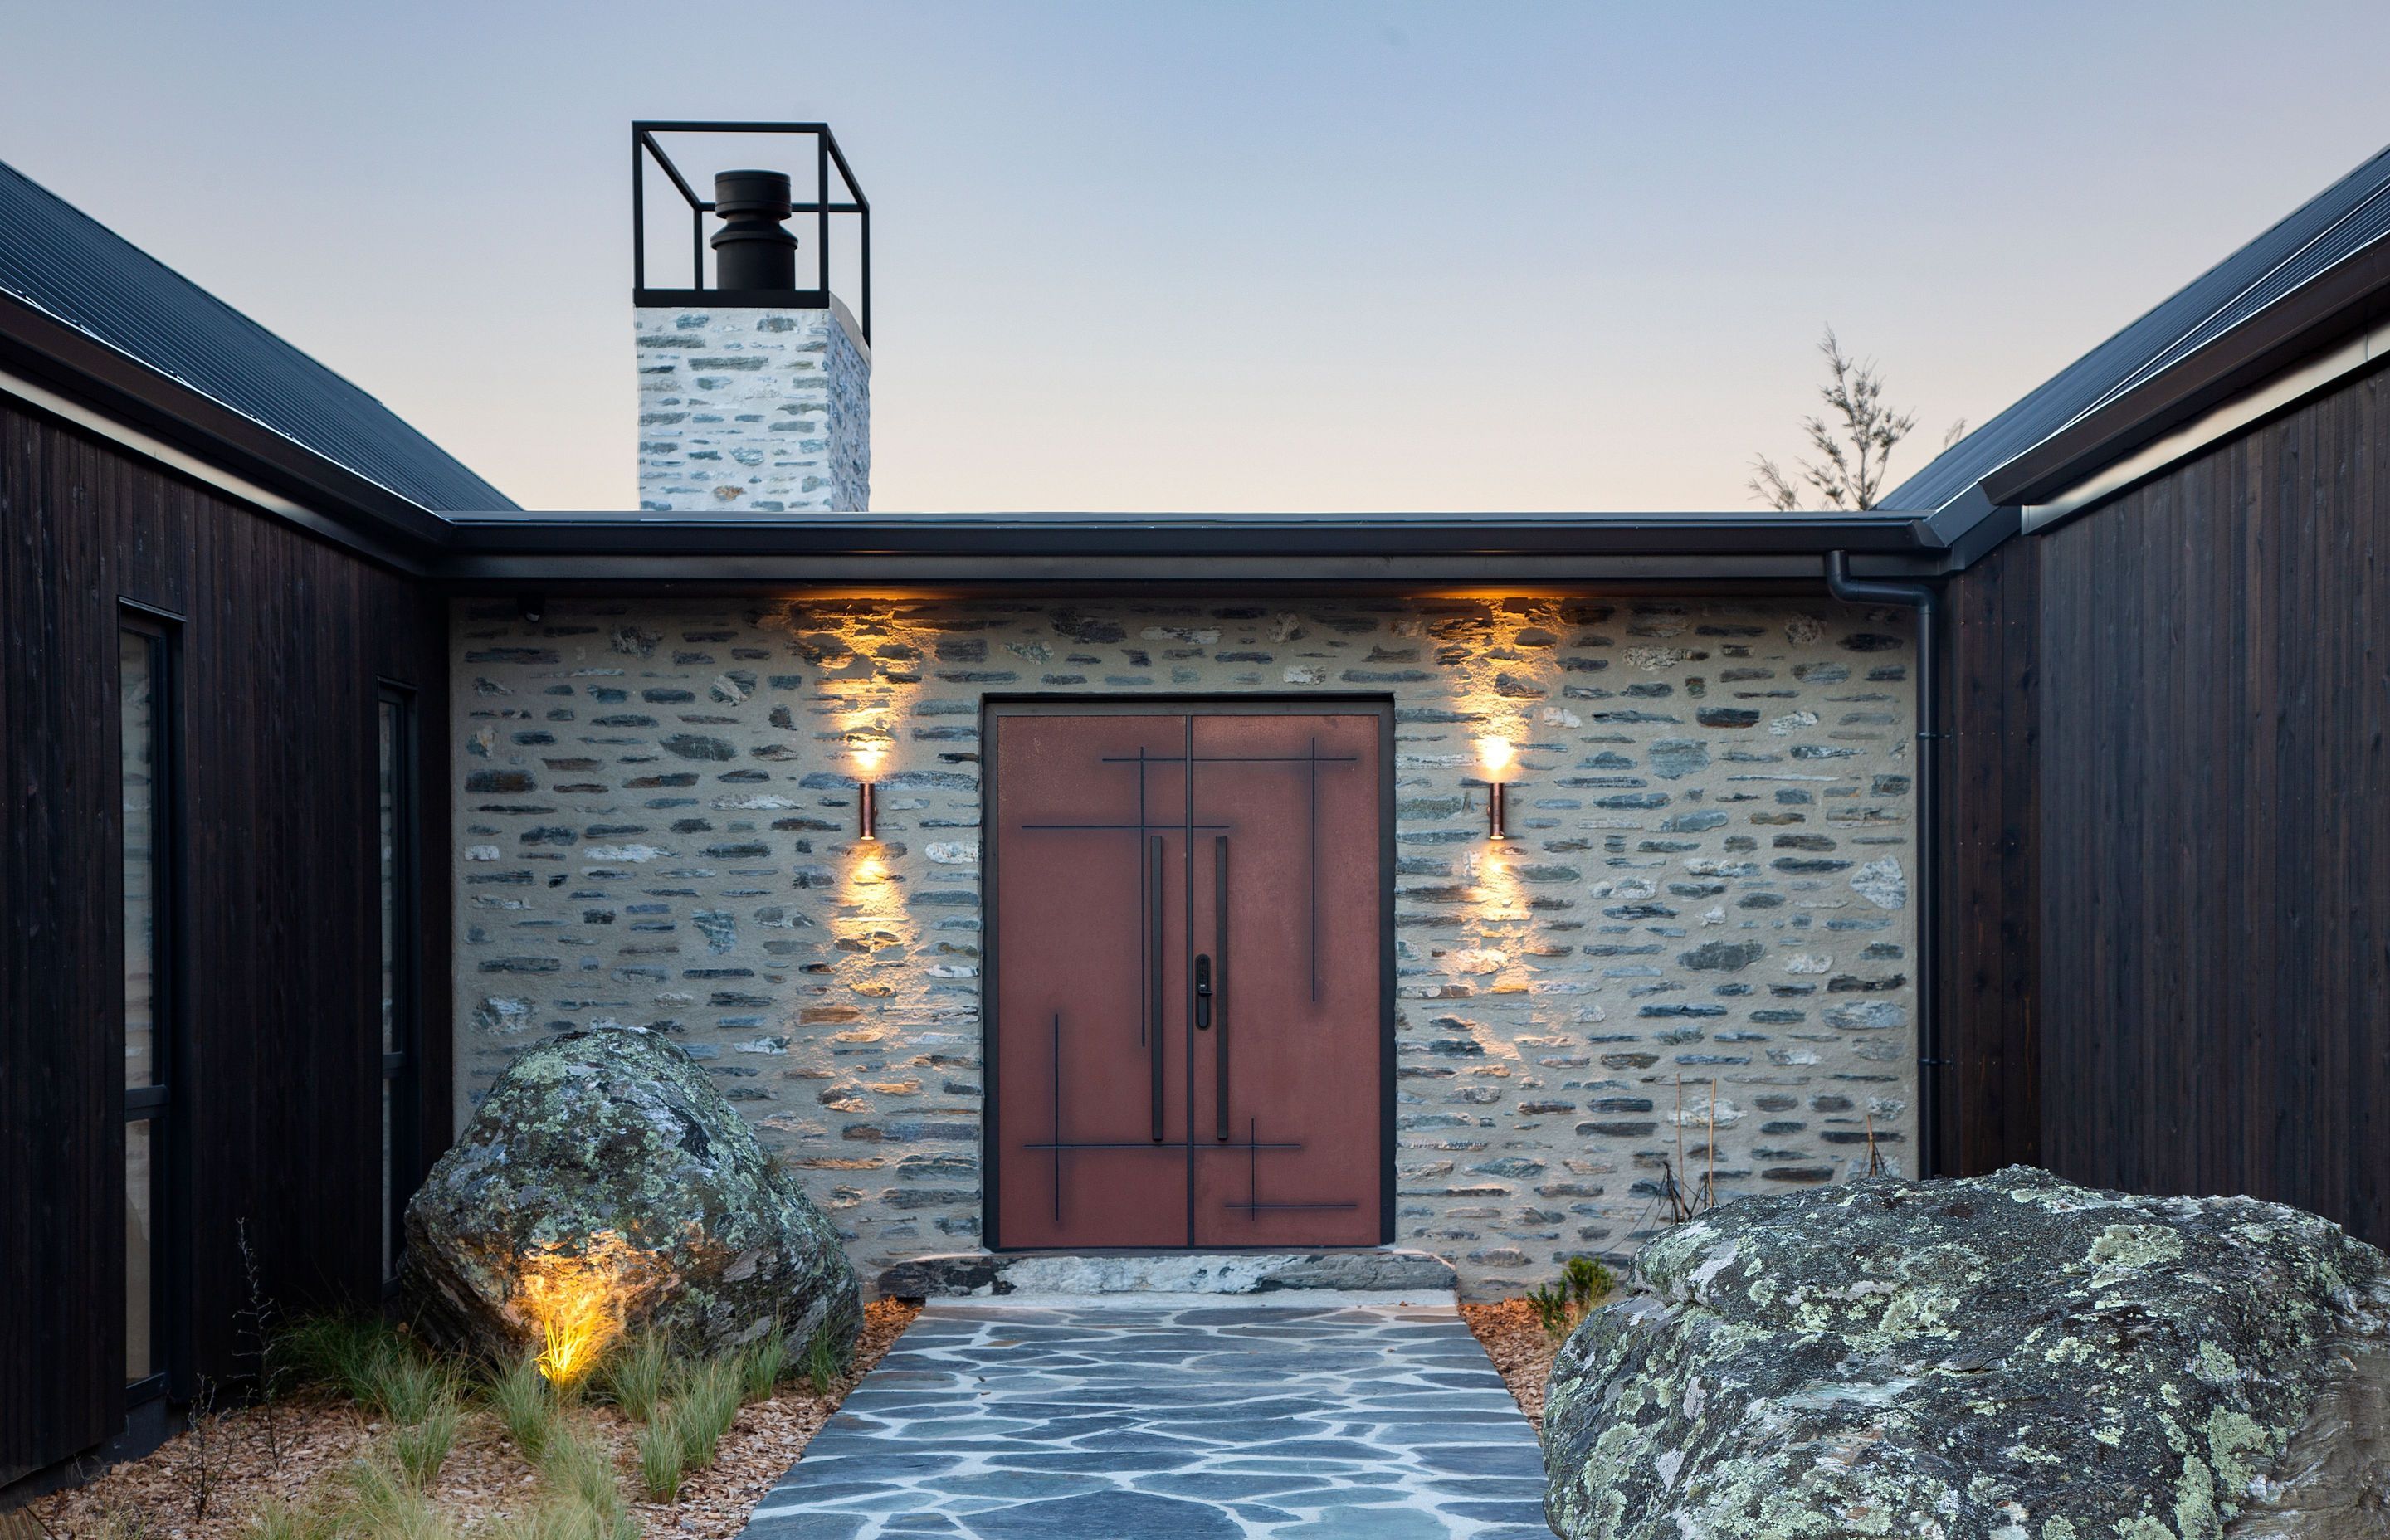 A statement corten front door offers a warm welcome to the home.